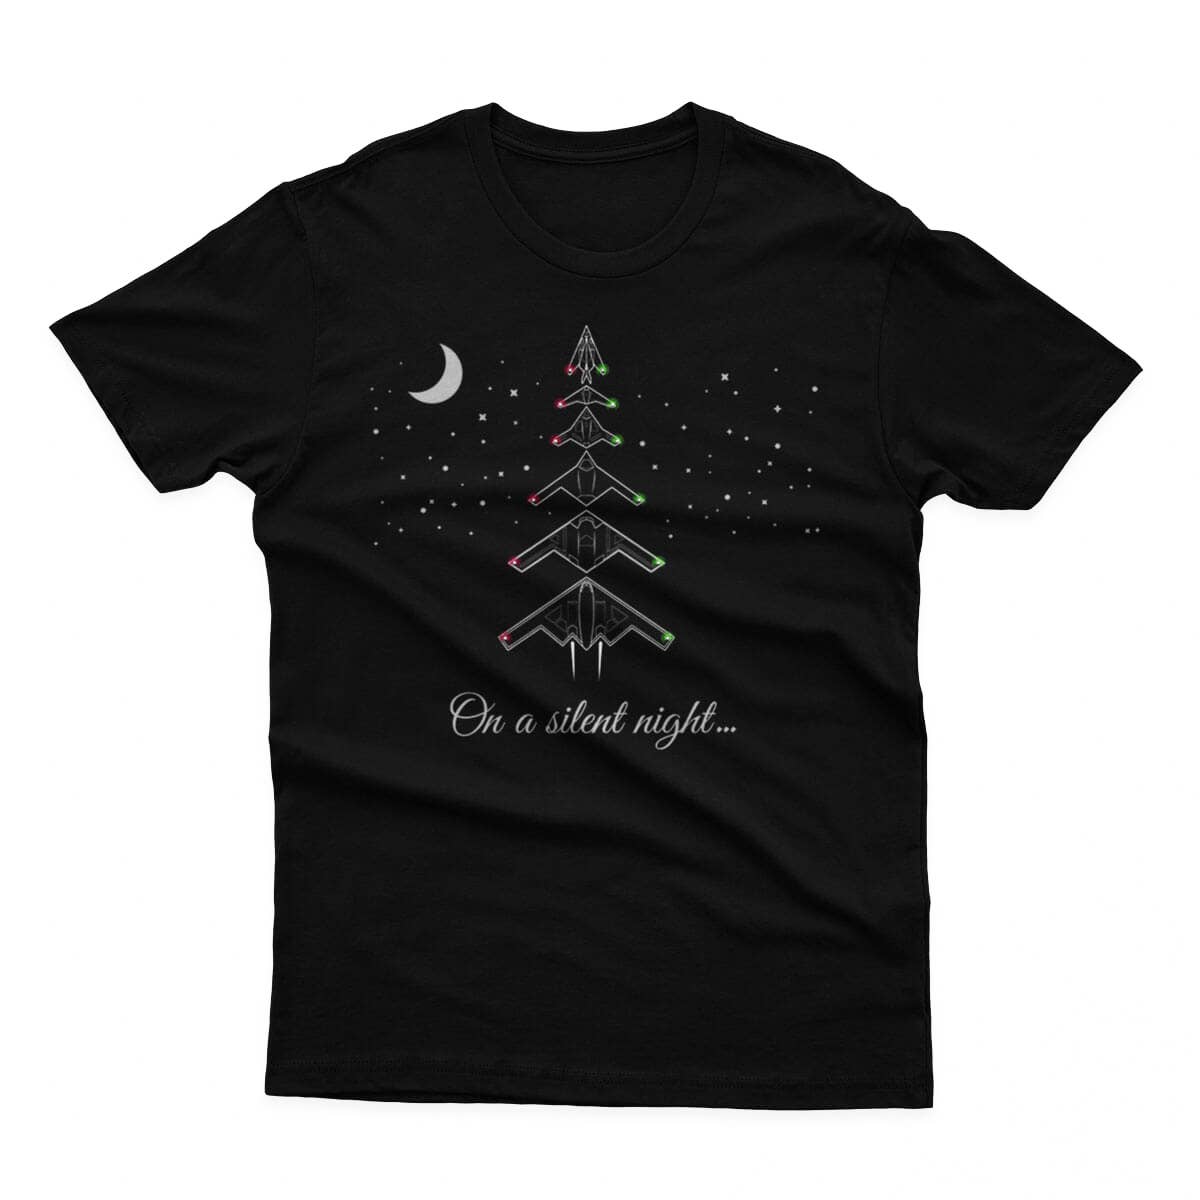 Sneak Down The Chimney In This Very Stealthy Christmas Tree T-Shirt